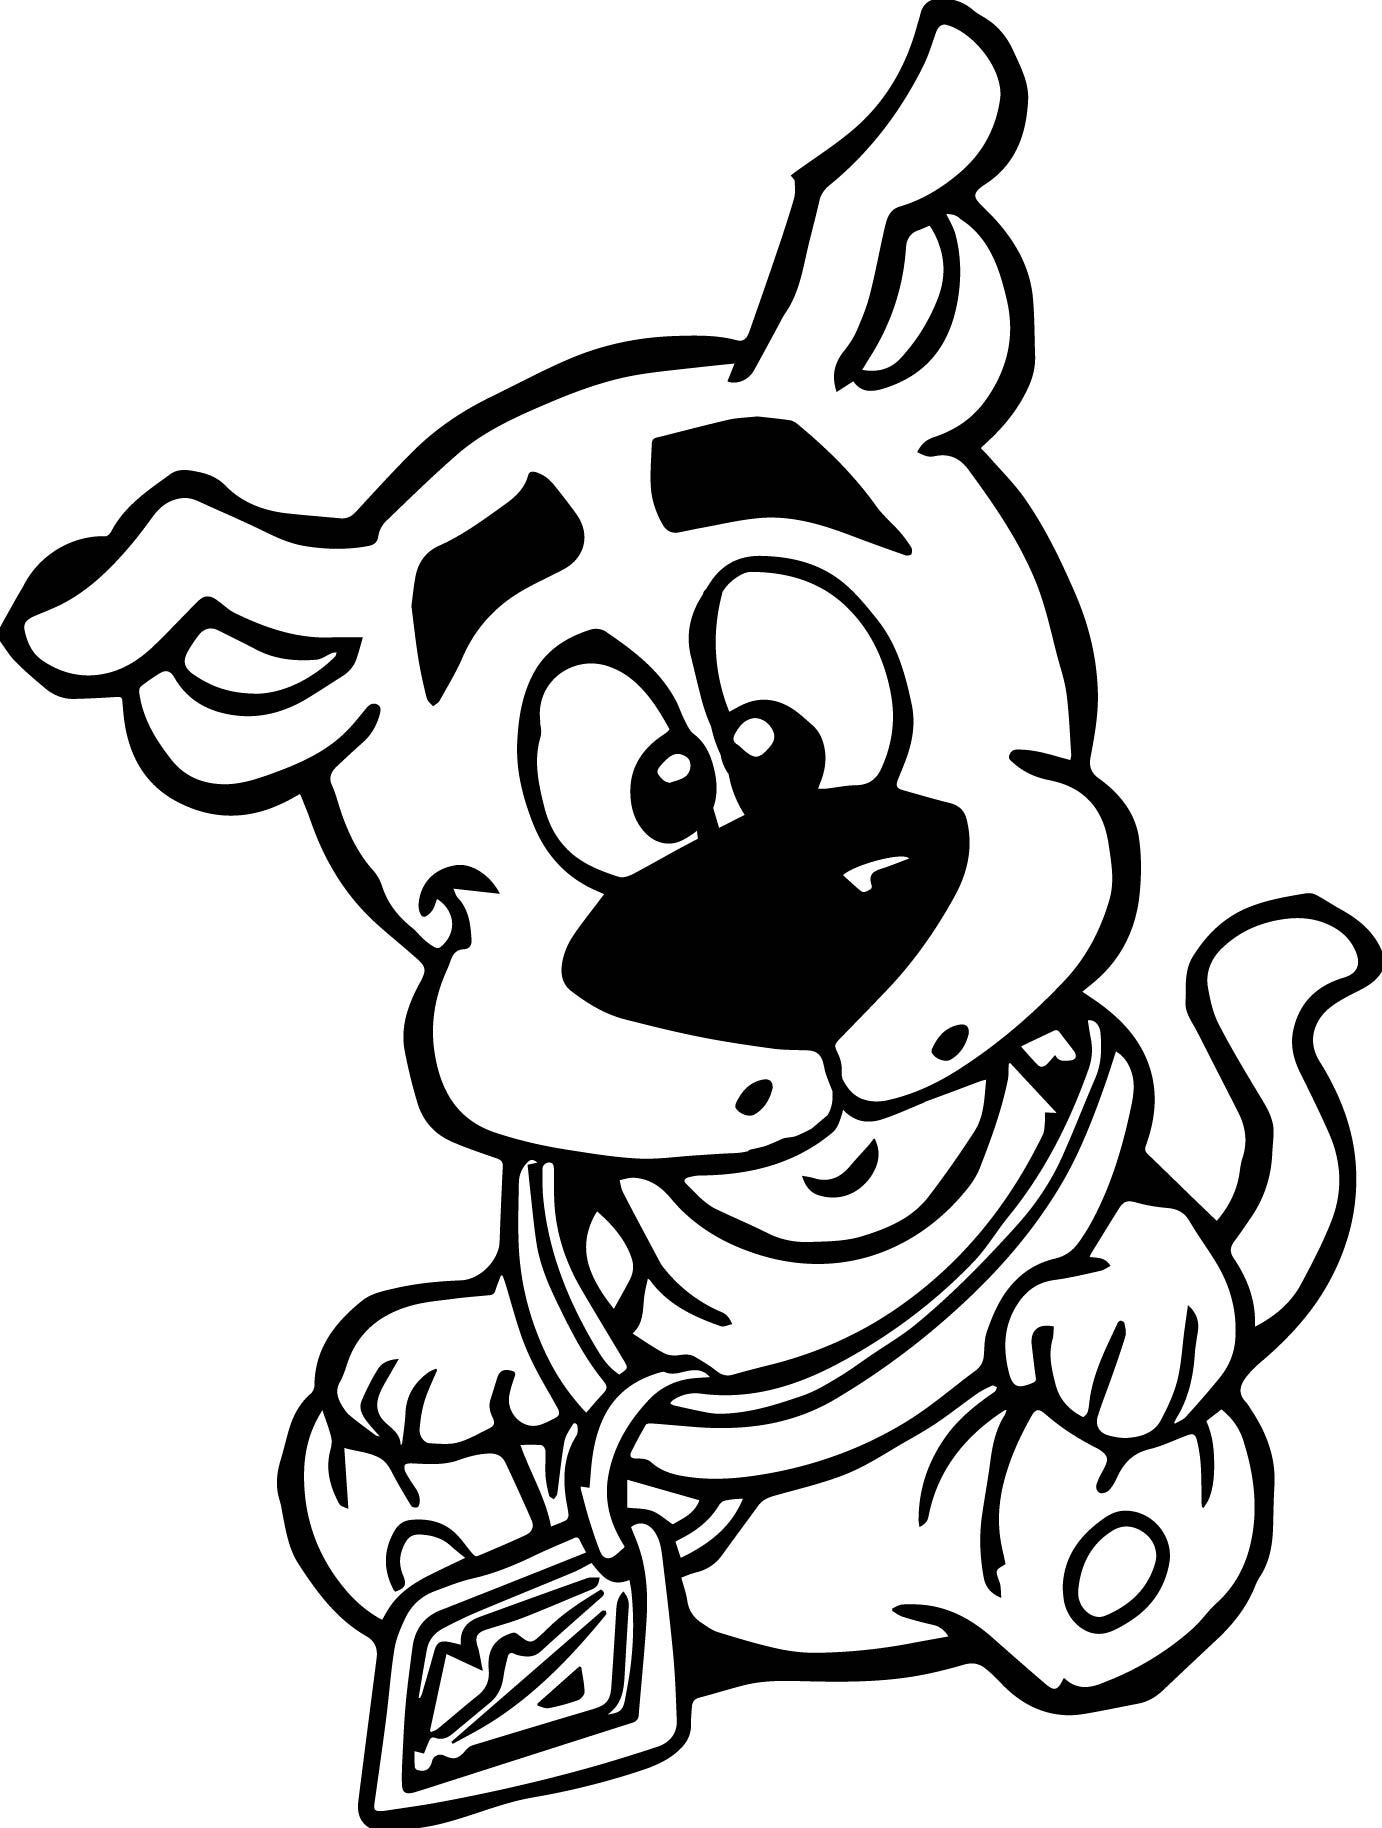 Coloring Pages For Boys Scooby Doo
 nice Baby Scooby Doo Coloring Page